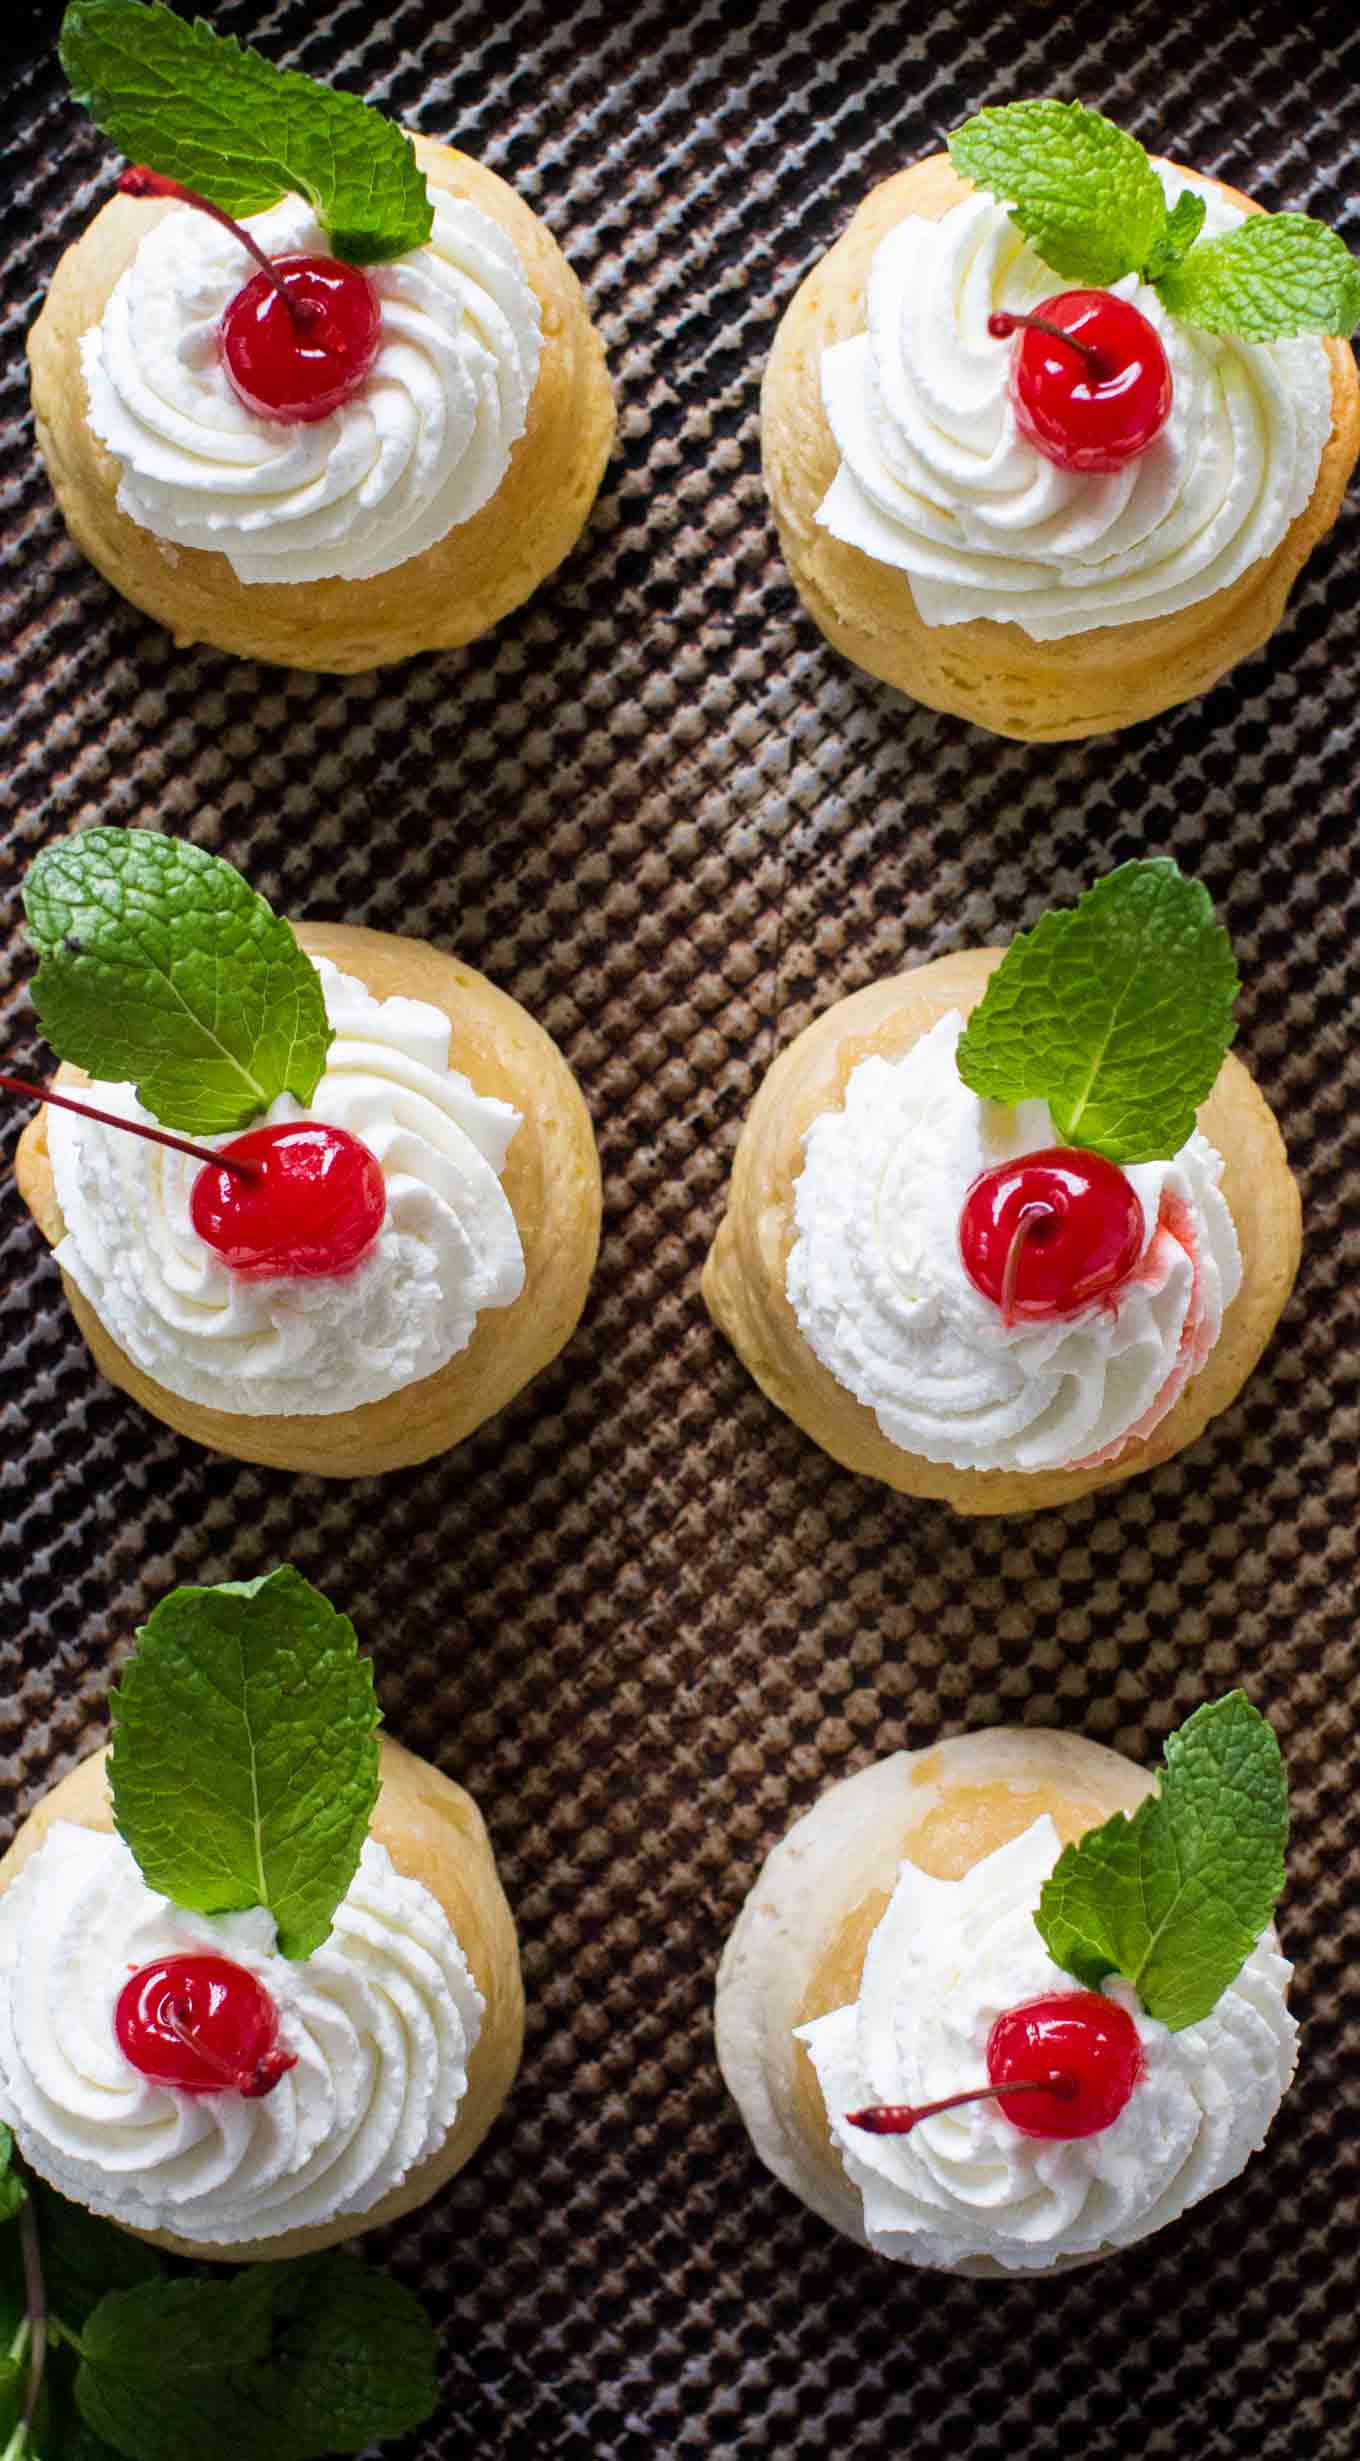 Easy Pineapple Upside Down Cakes turns making dessert into a fun task! These cakes are made with biscuit dough and are ready in 30 minutes!